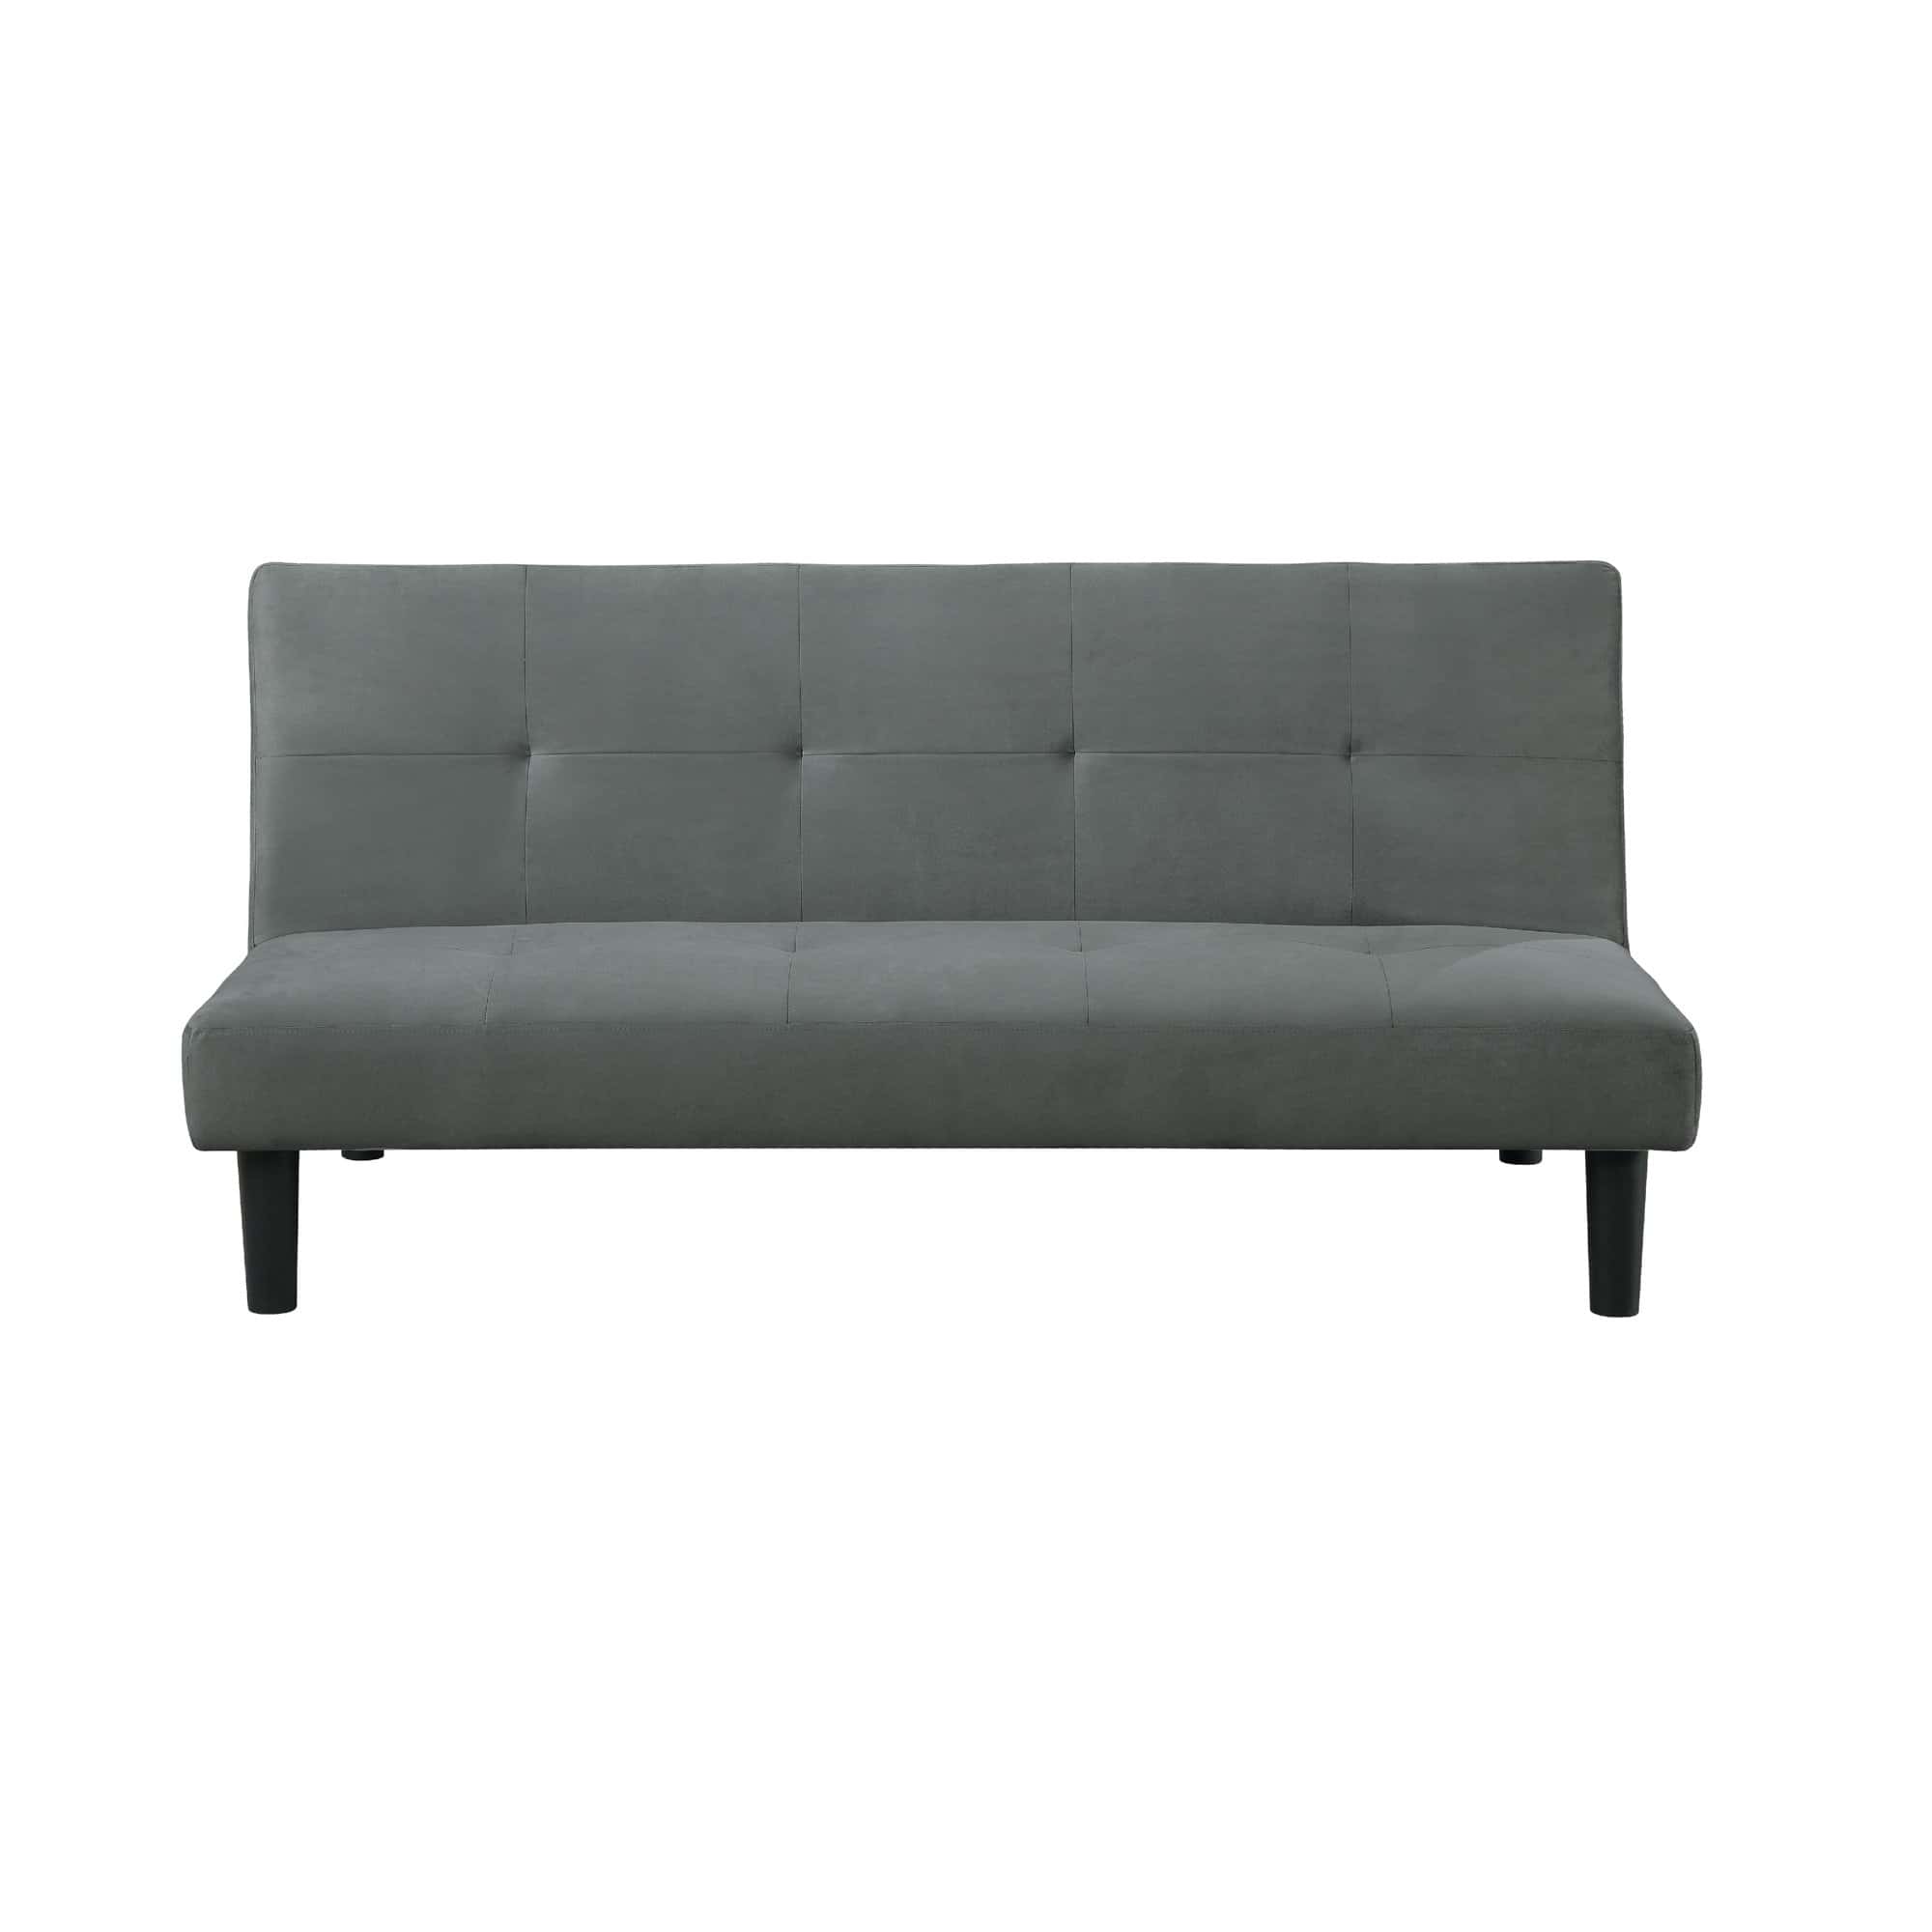 Serta® Charcoal Casual Convertible Tori Sofa by Lifestyle Solutions